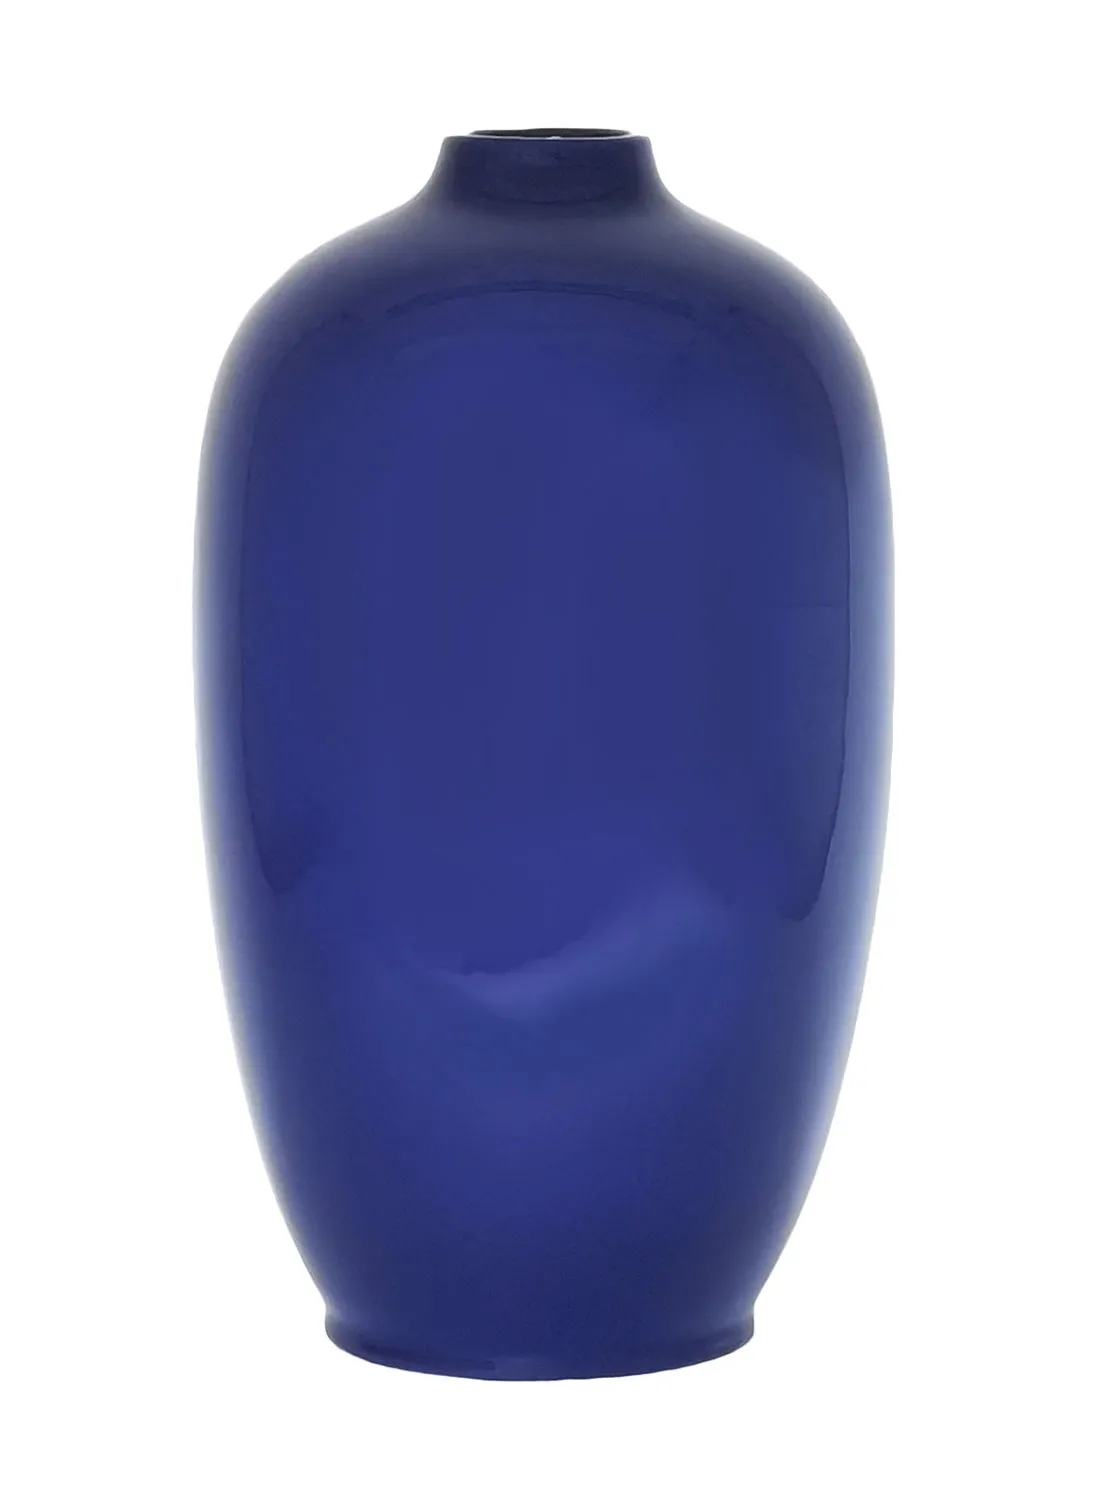 ebb & flow Classic Artistic Shape Ceramic Vase Unique Luxury Quality Material For The Perfect Stylish Home N13-010 Blue 24.5 x 42cm